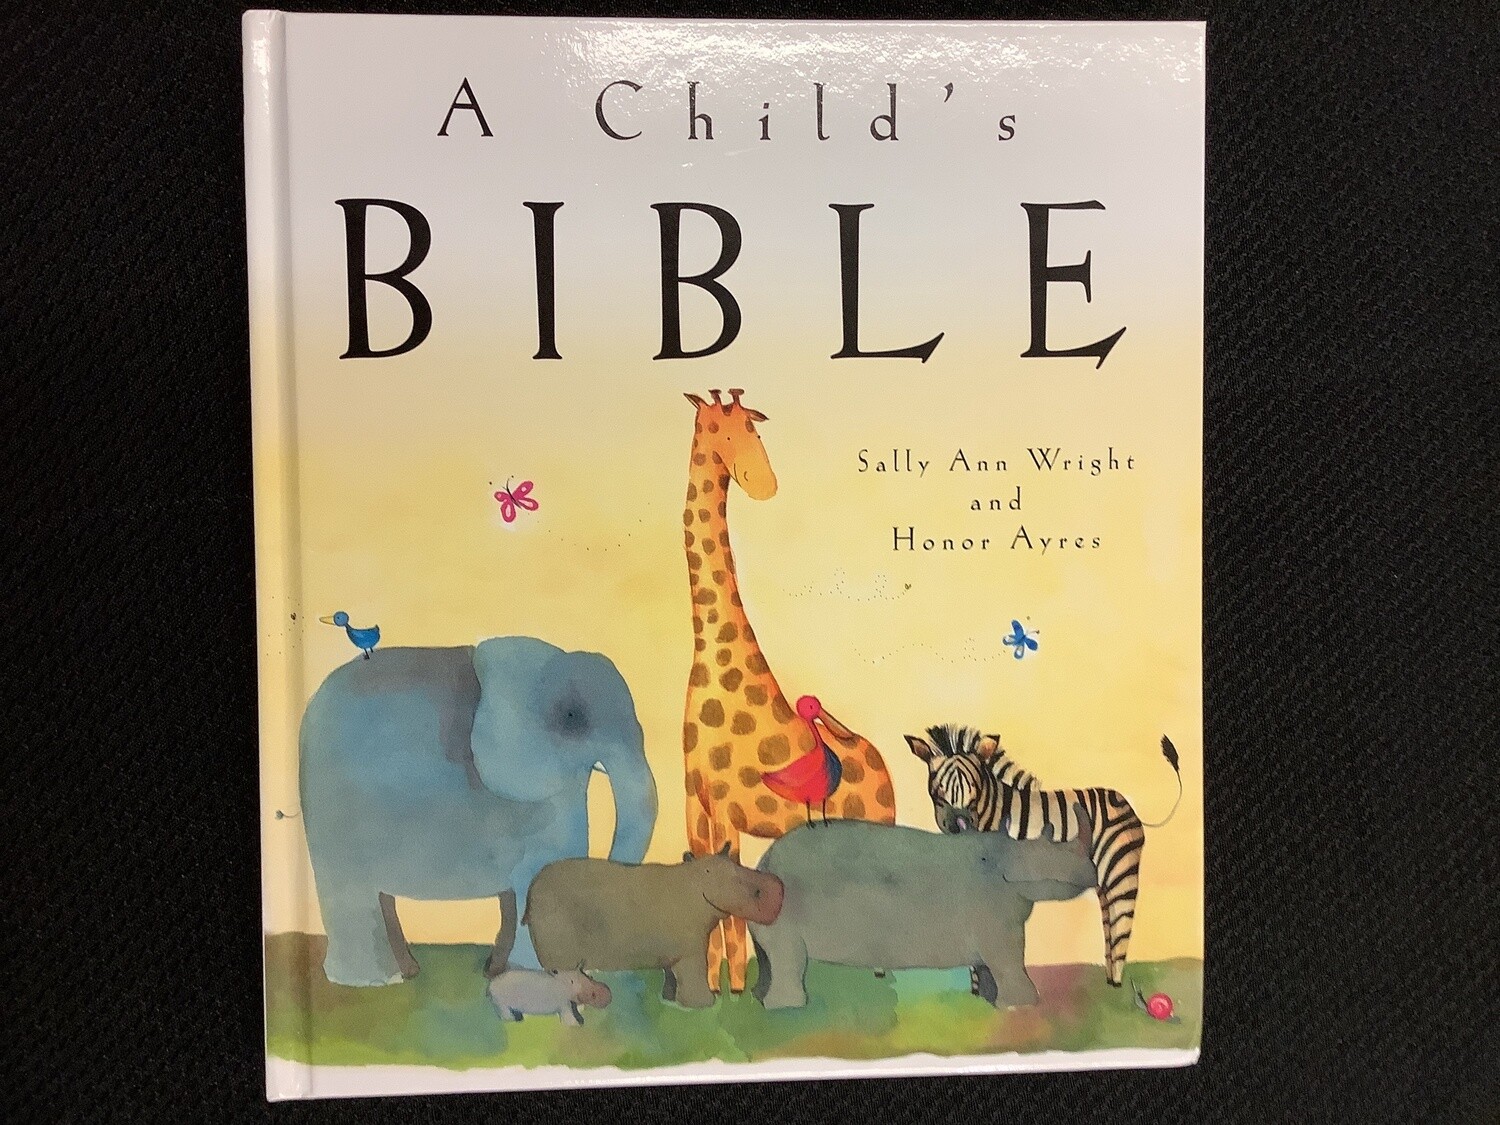 A Child's Bible - Sally Ann Wright, Honor Ayres